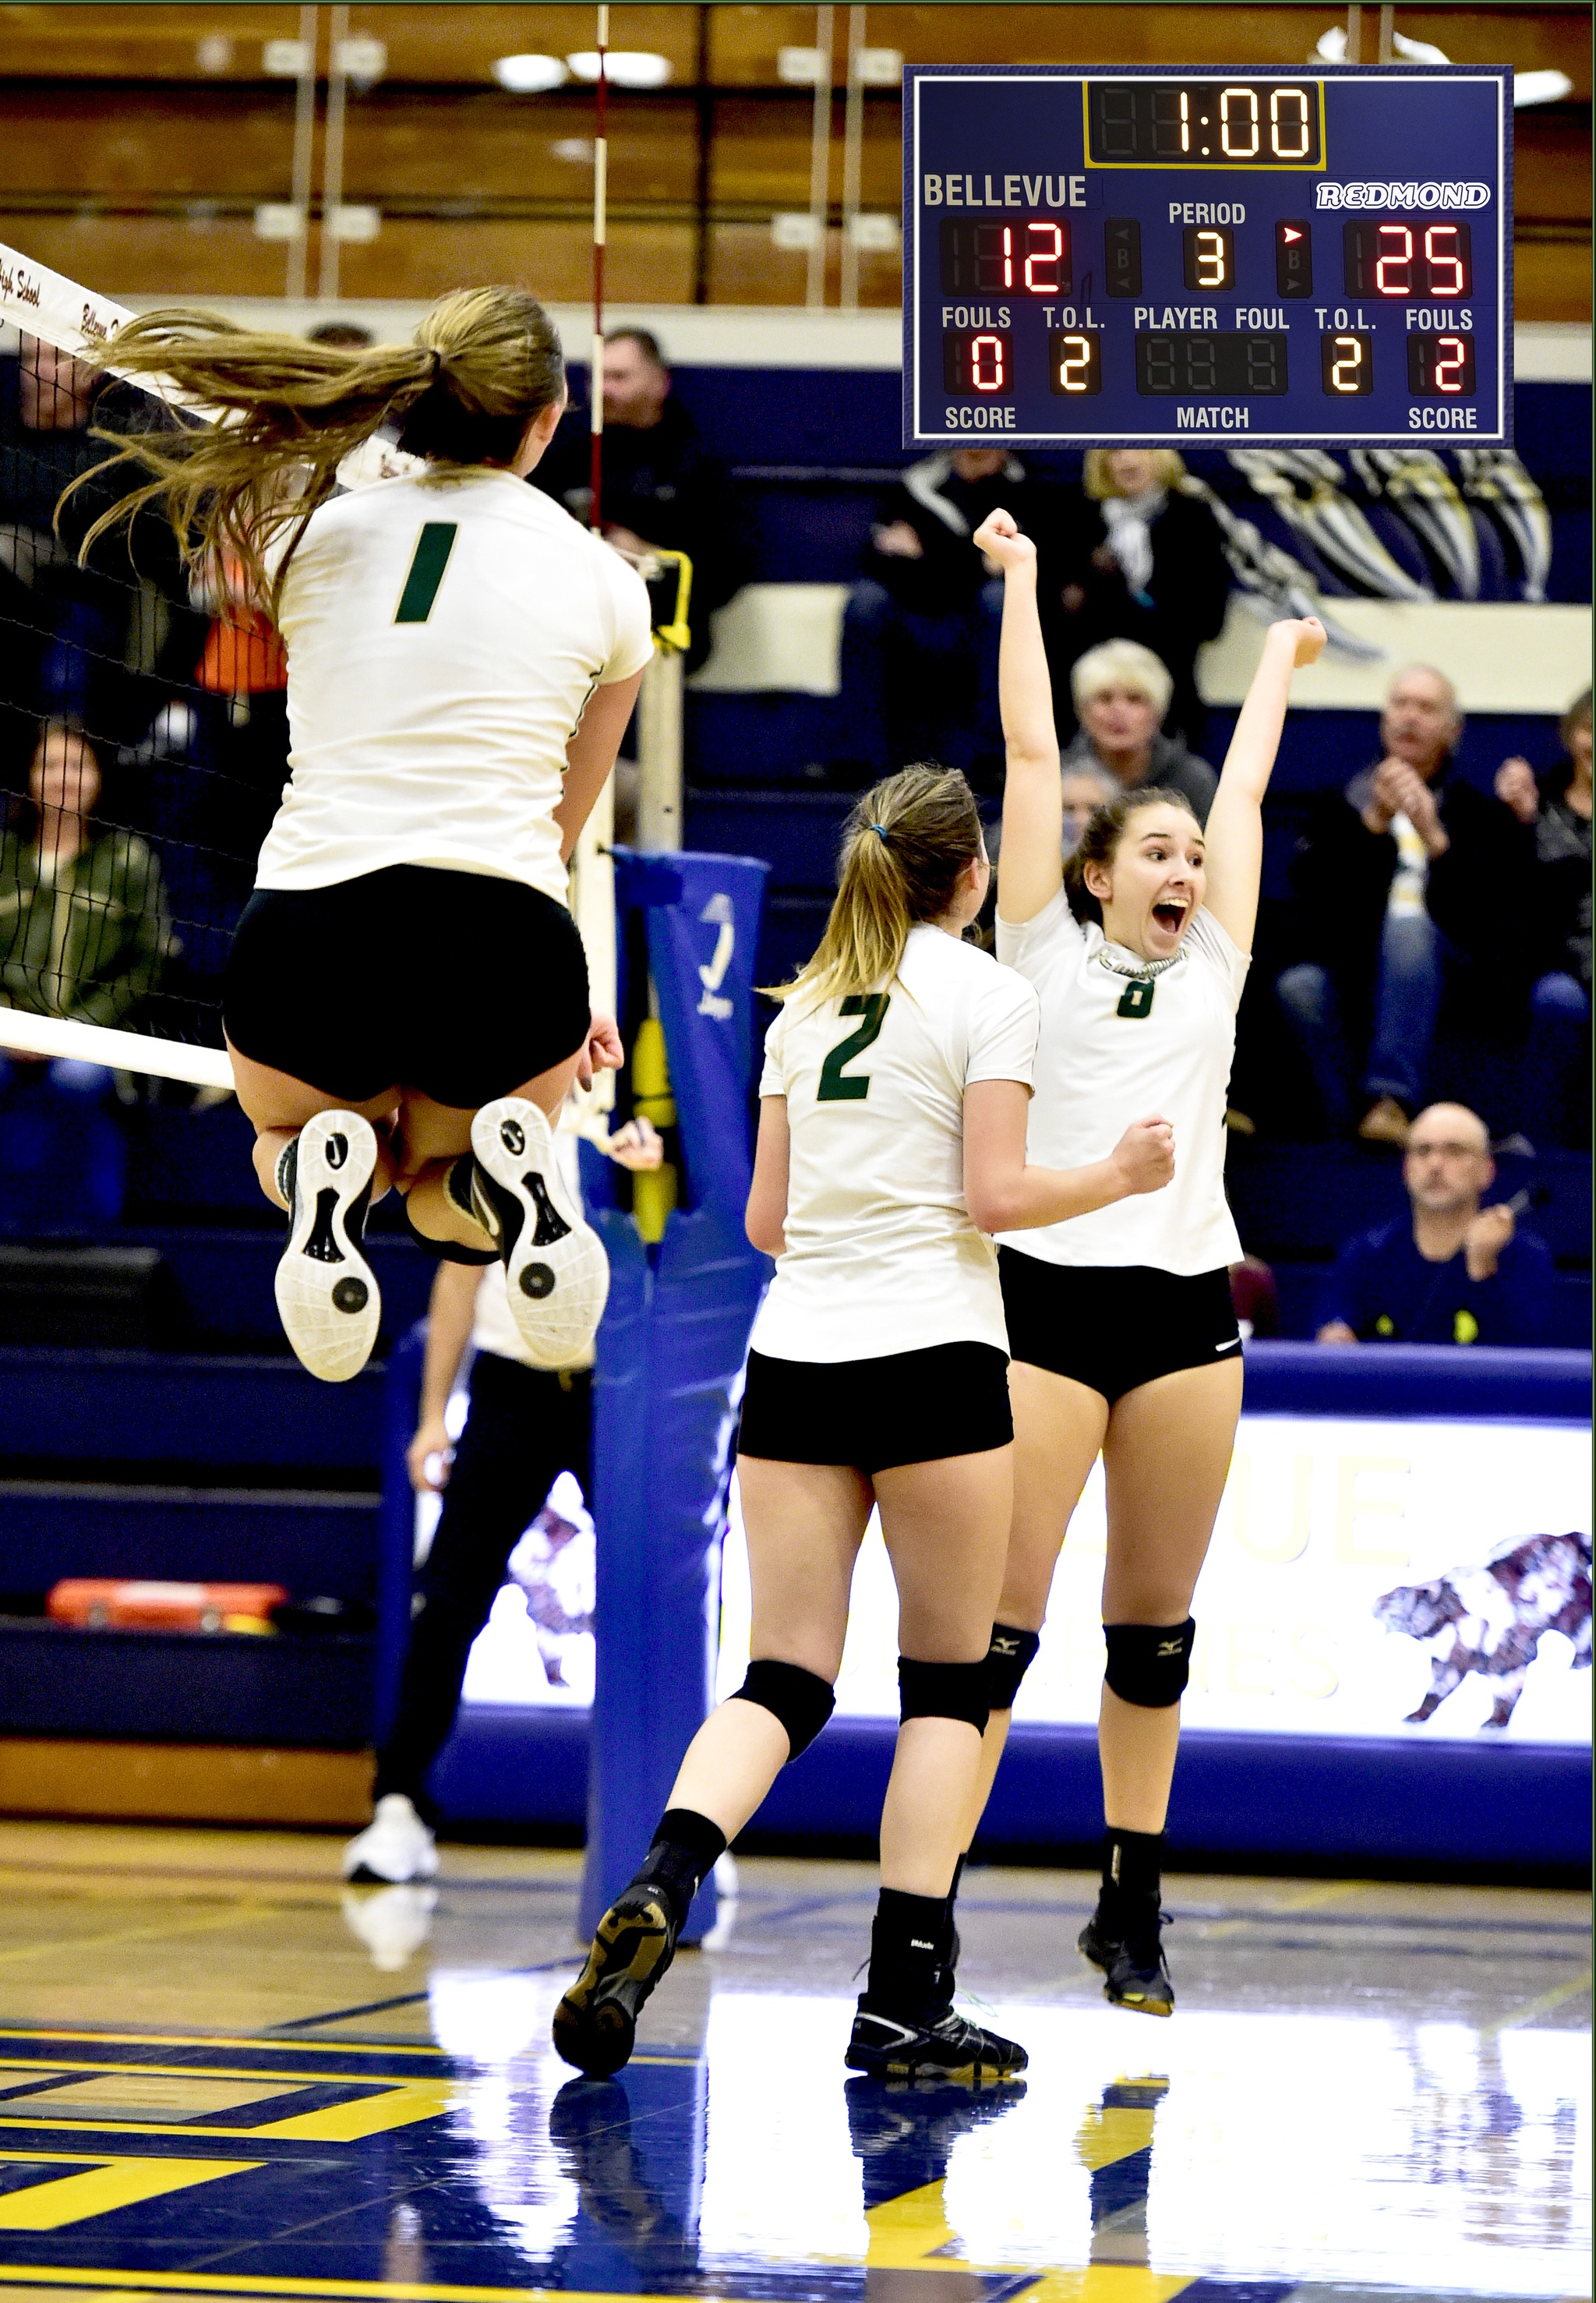 Redmond High volleyball players celebrate during Monday’s victory over Bellevue High. From left